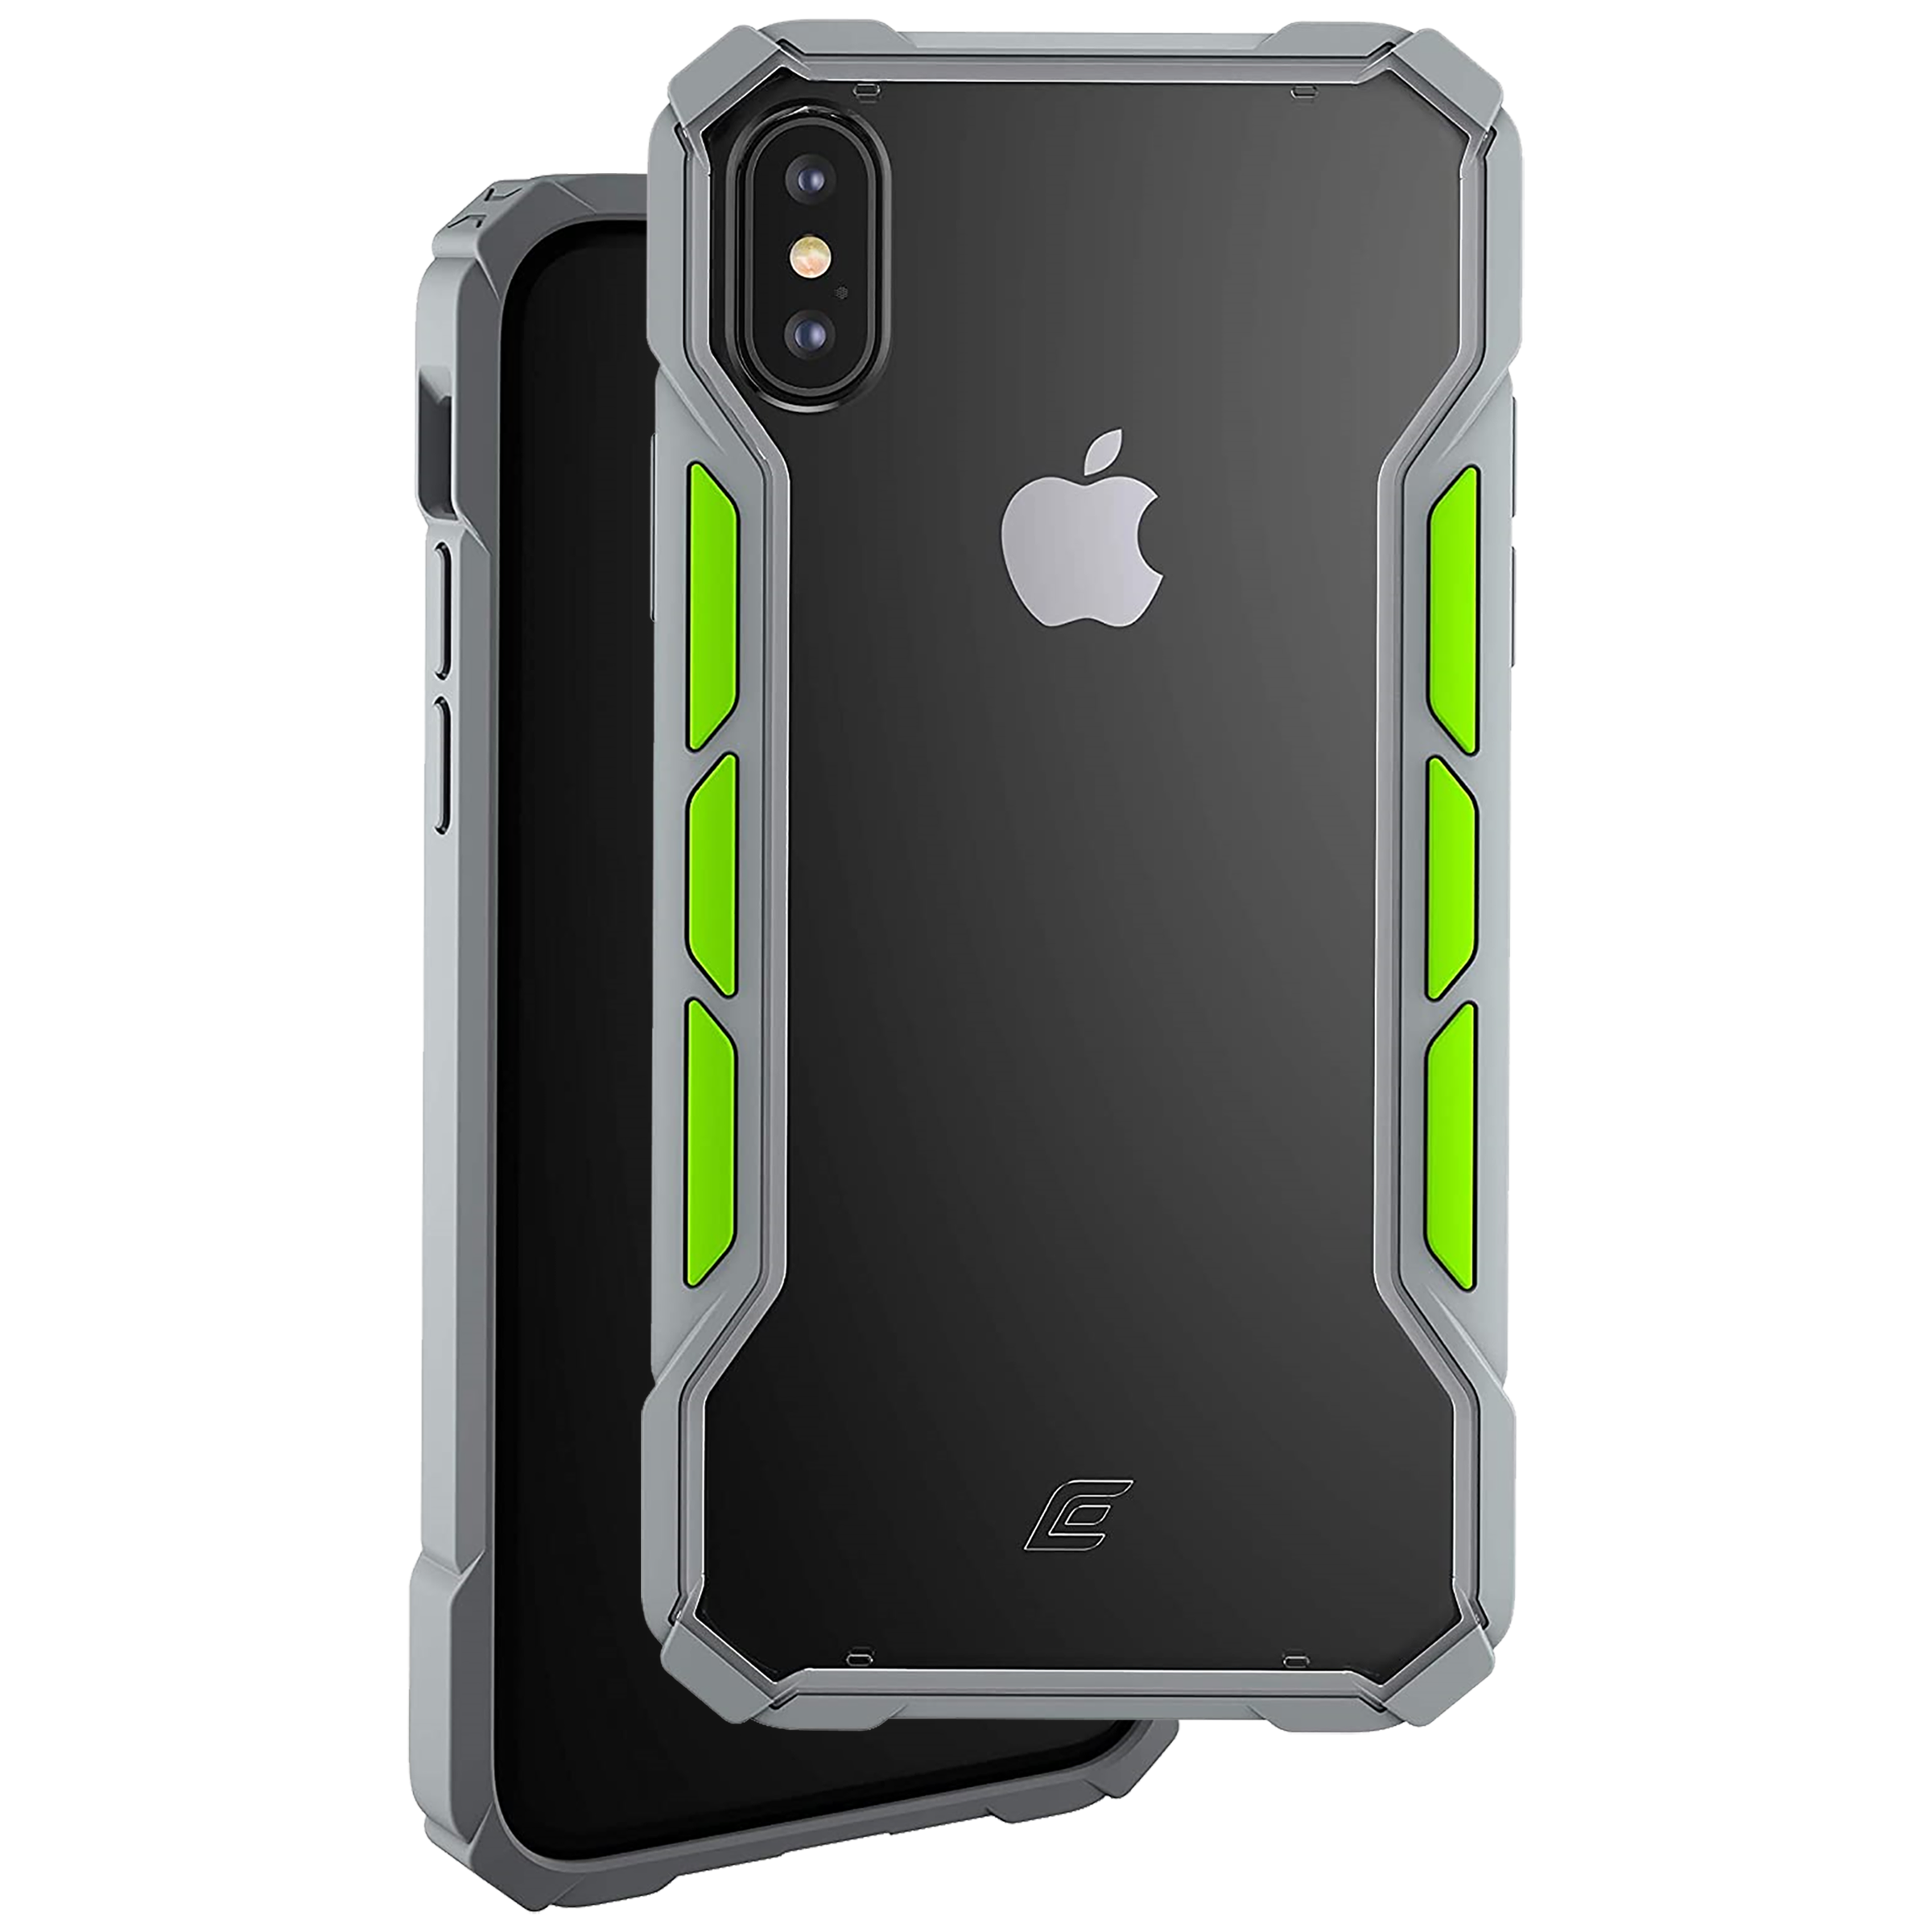 Element Case Rally Polycarbonate Back Case For iPhone X / XS (Mil-Spec Drop Protection, EMT-322-195EY-04, Light Grey/Lime)_1